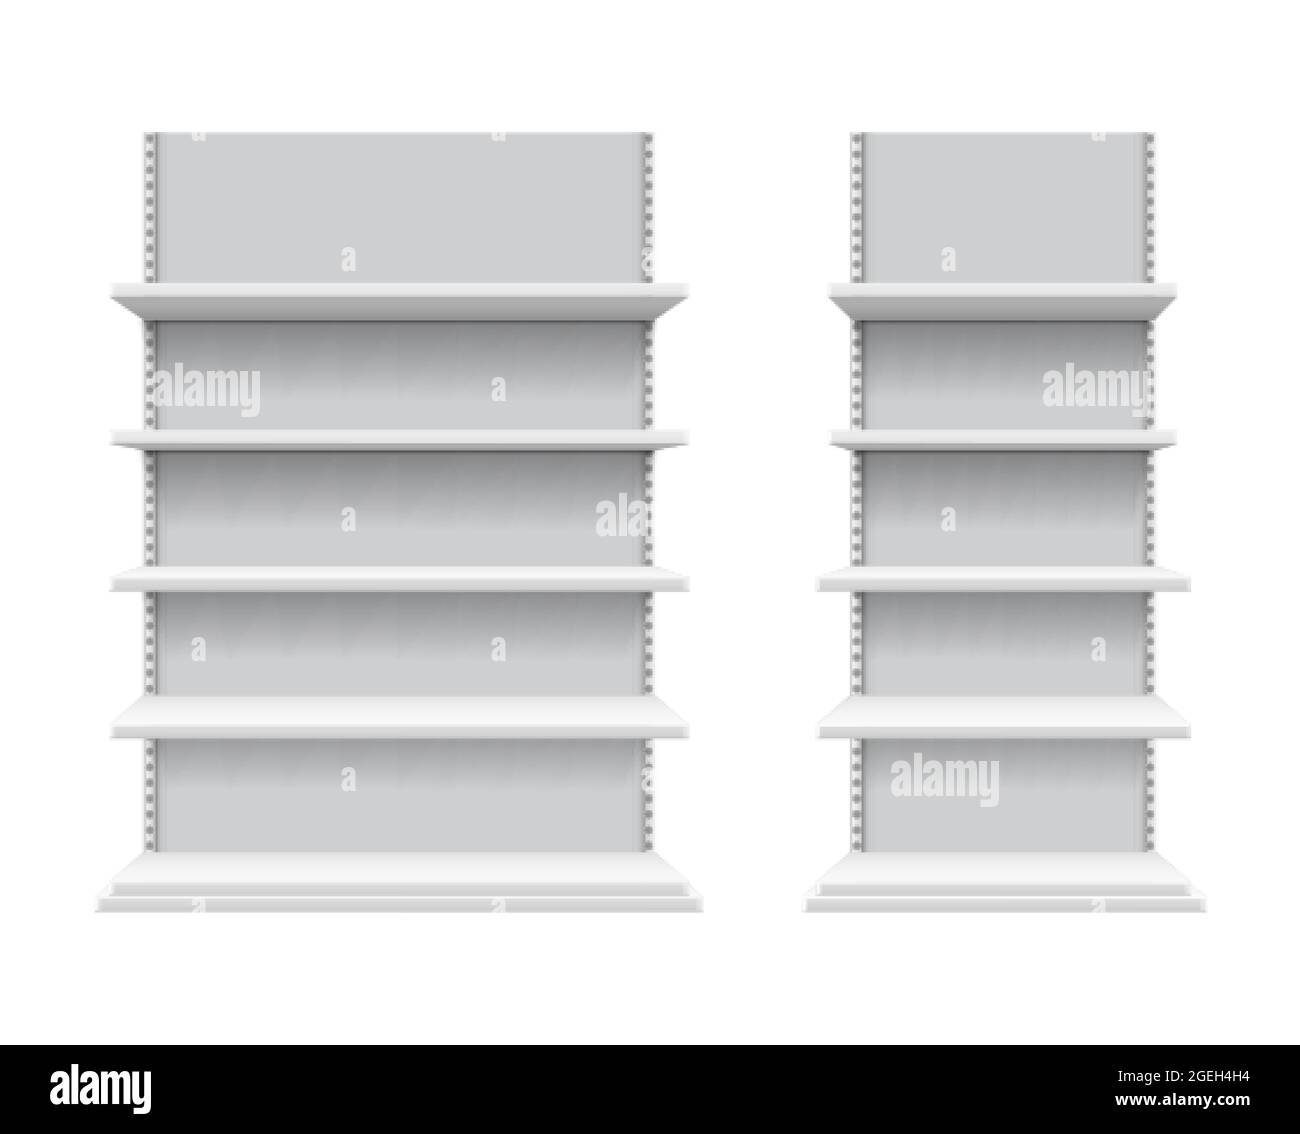 Realistic shelves mockup. Isolated store shelving, white commercial display. Supermarket or expo showcase vector illustration Stock Vector